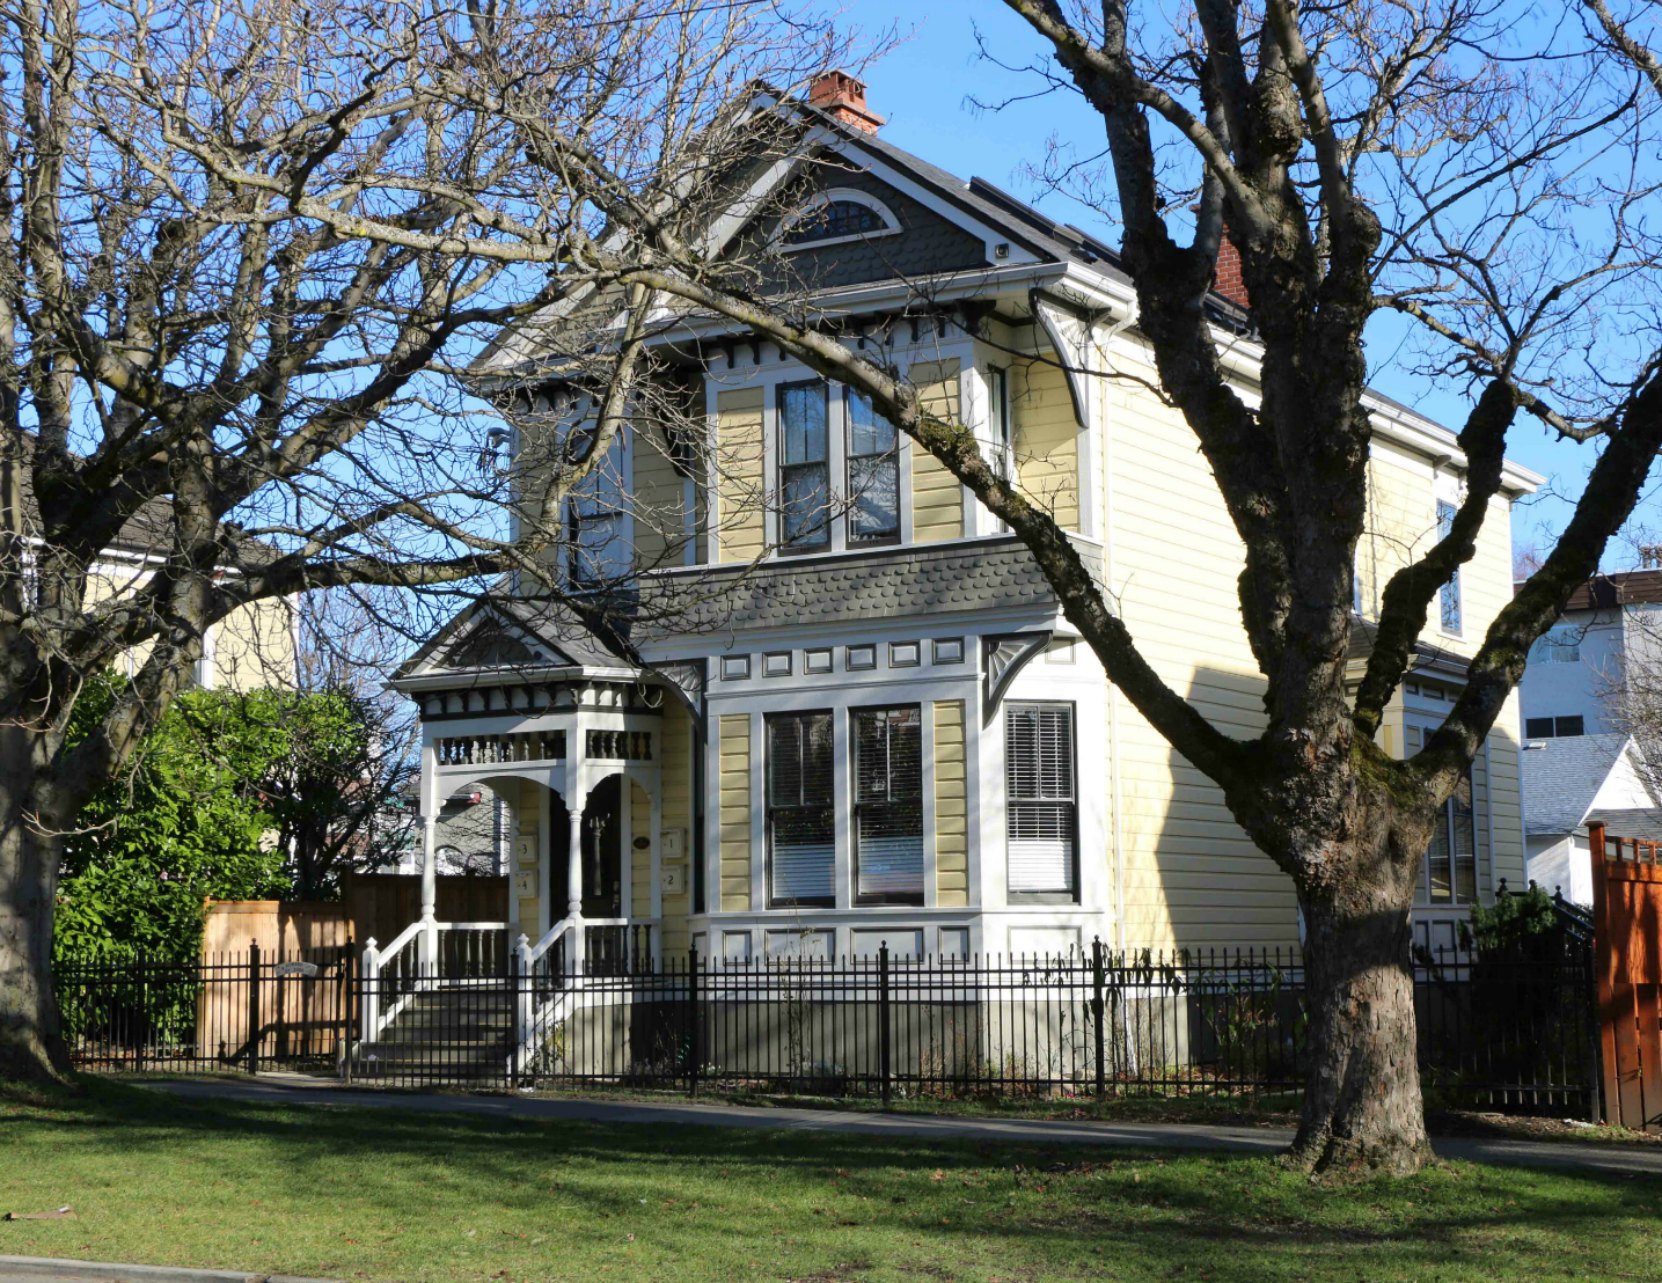 737 Vancouver Street, designed and built in 1892 by architect John Teague (photo by Victoria Online Sightseeing Tours)